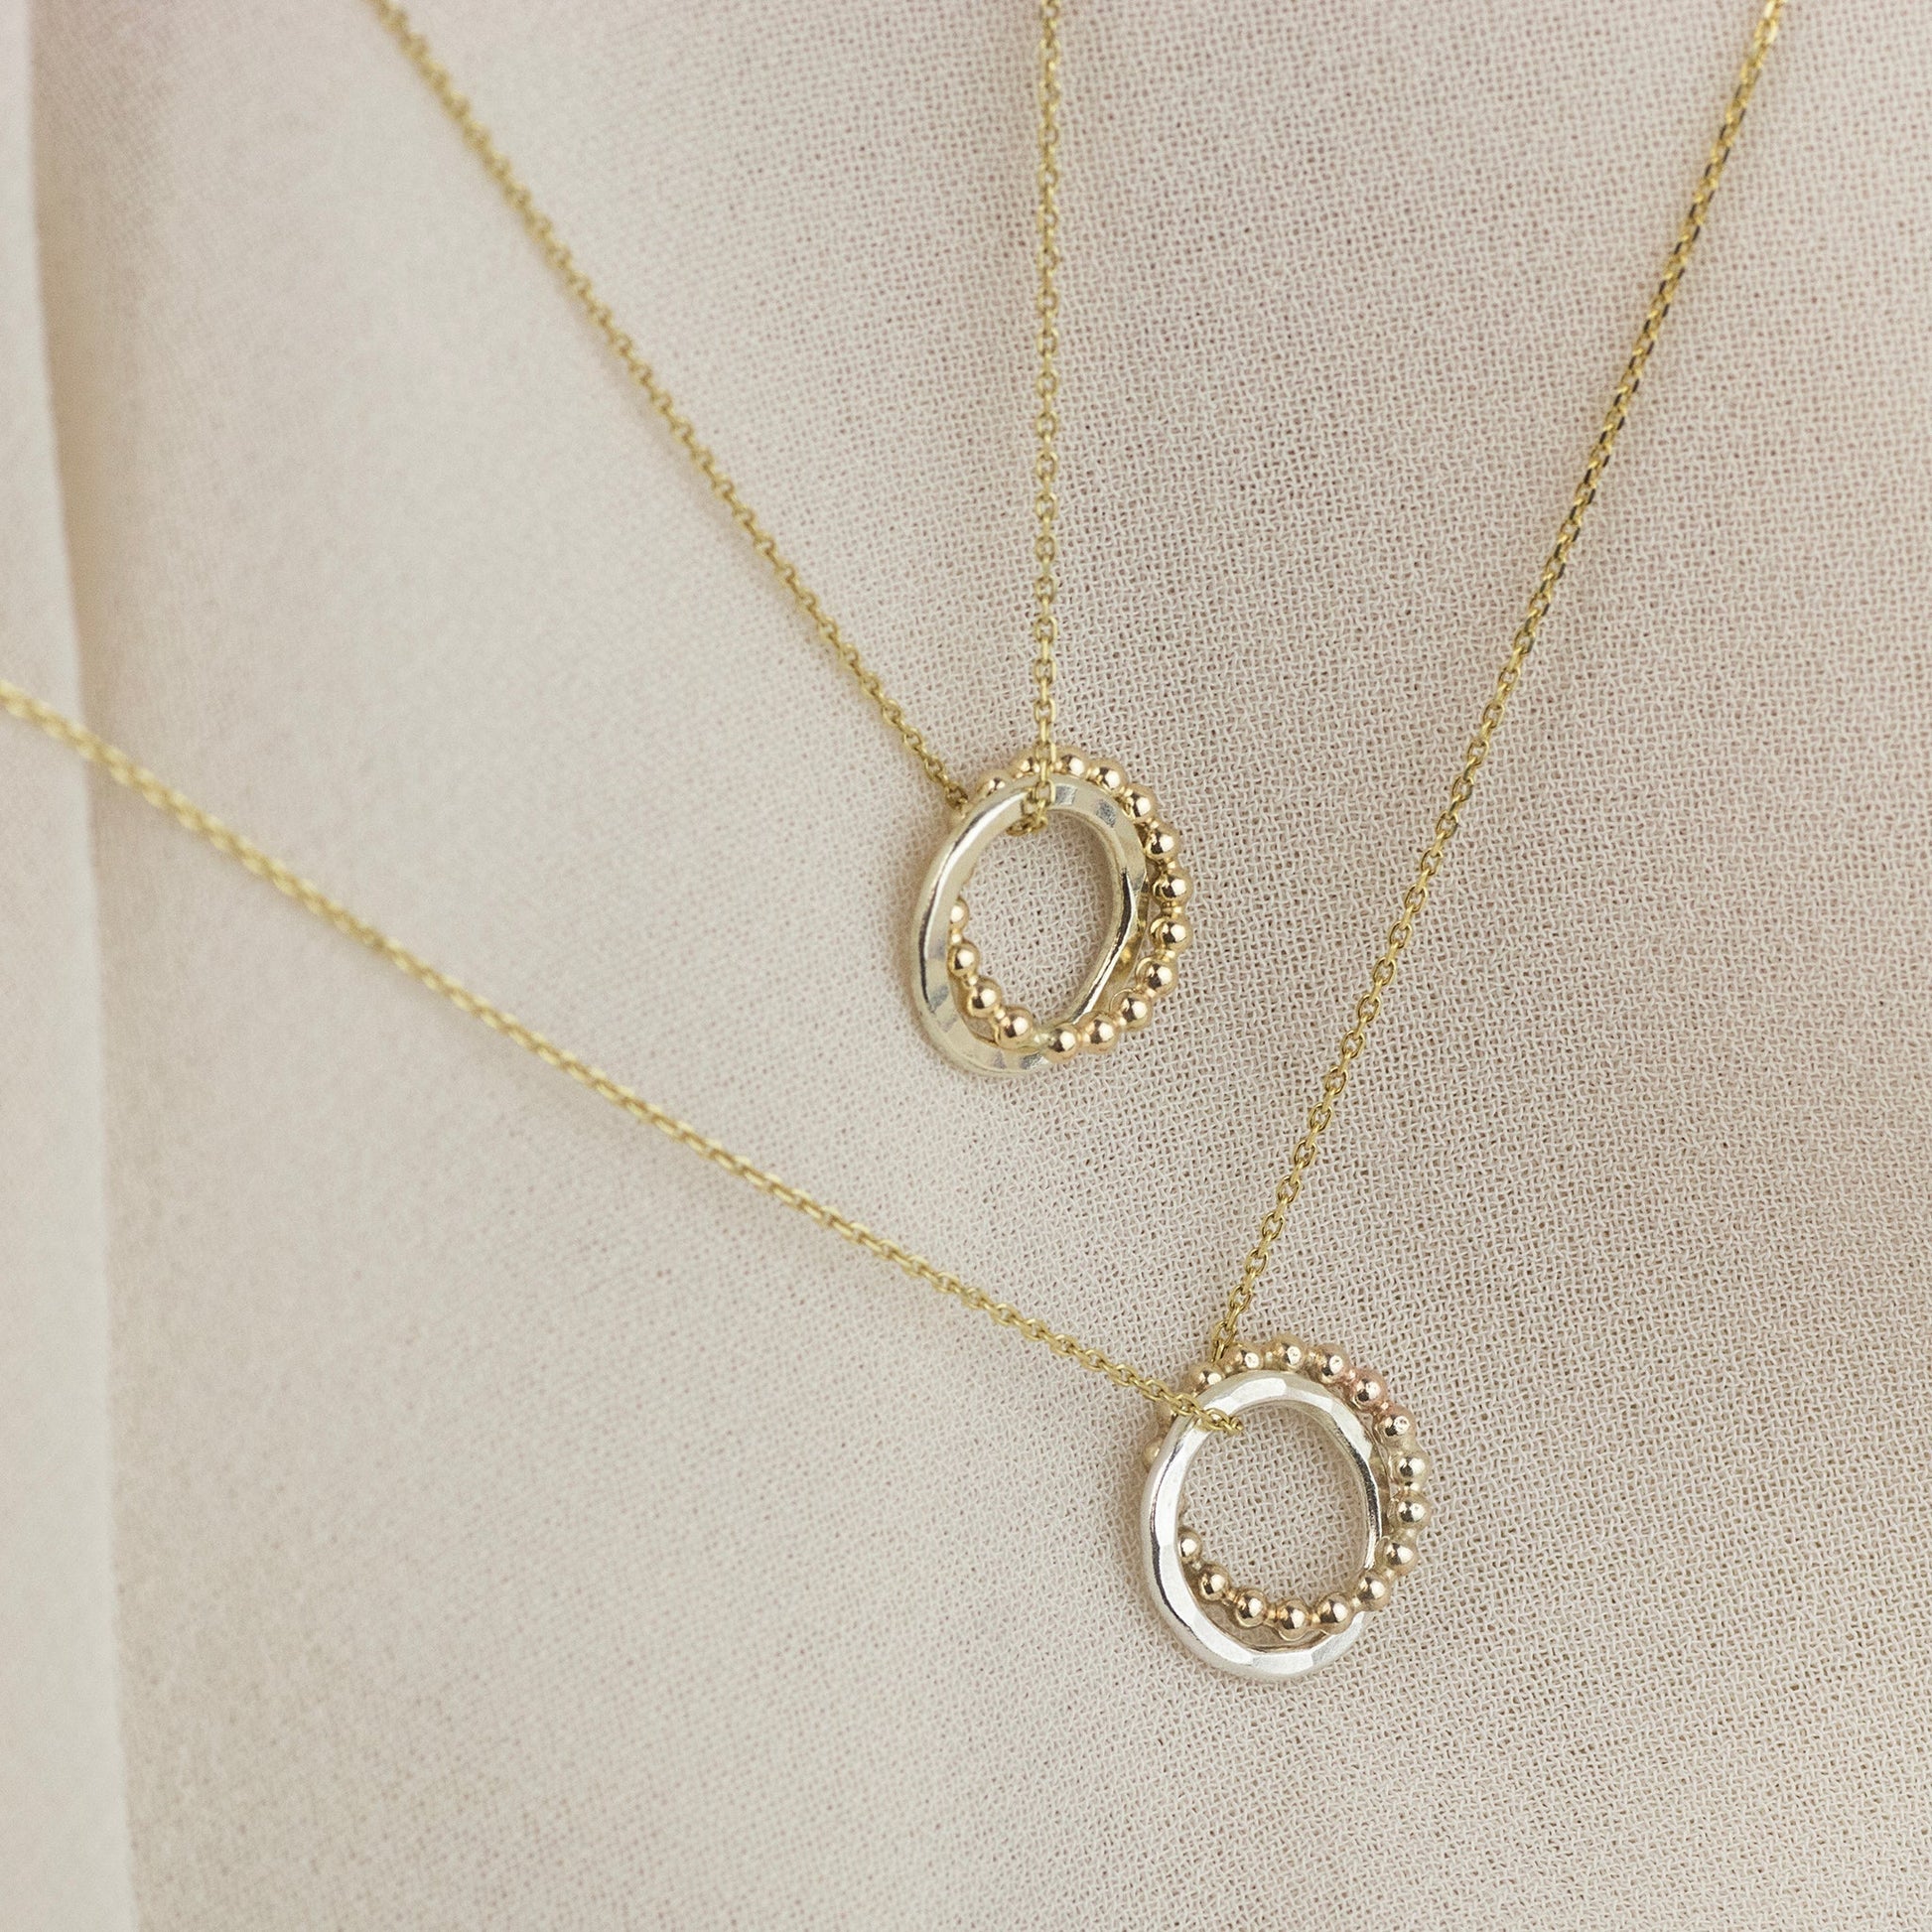 Bride & Bridesmaid Necklaces Matching Set - 9kt Gold & Silver Love Knot Necklaces